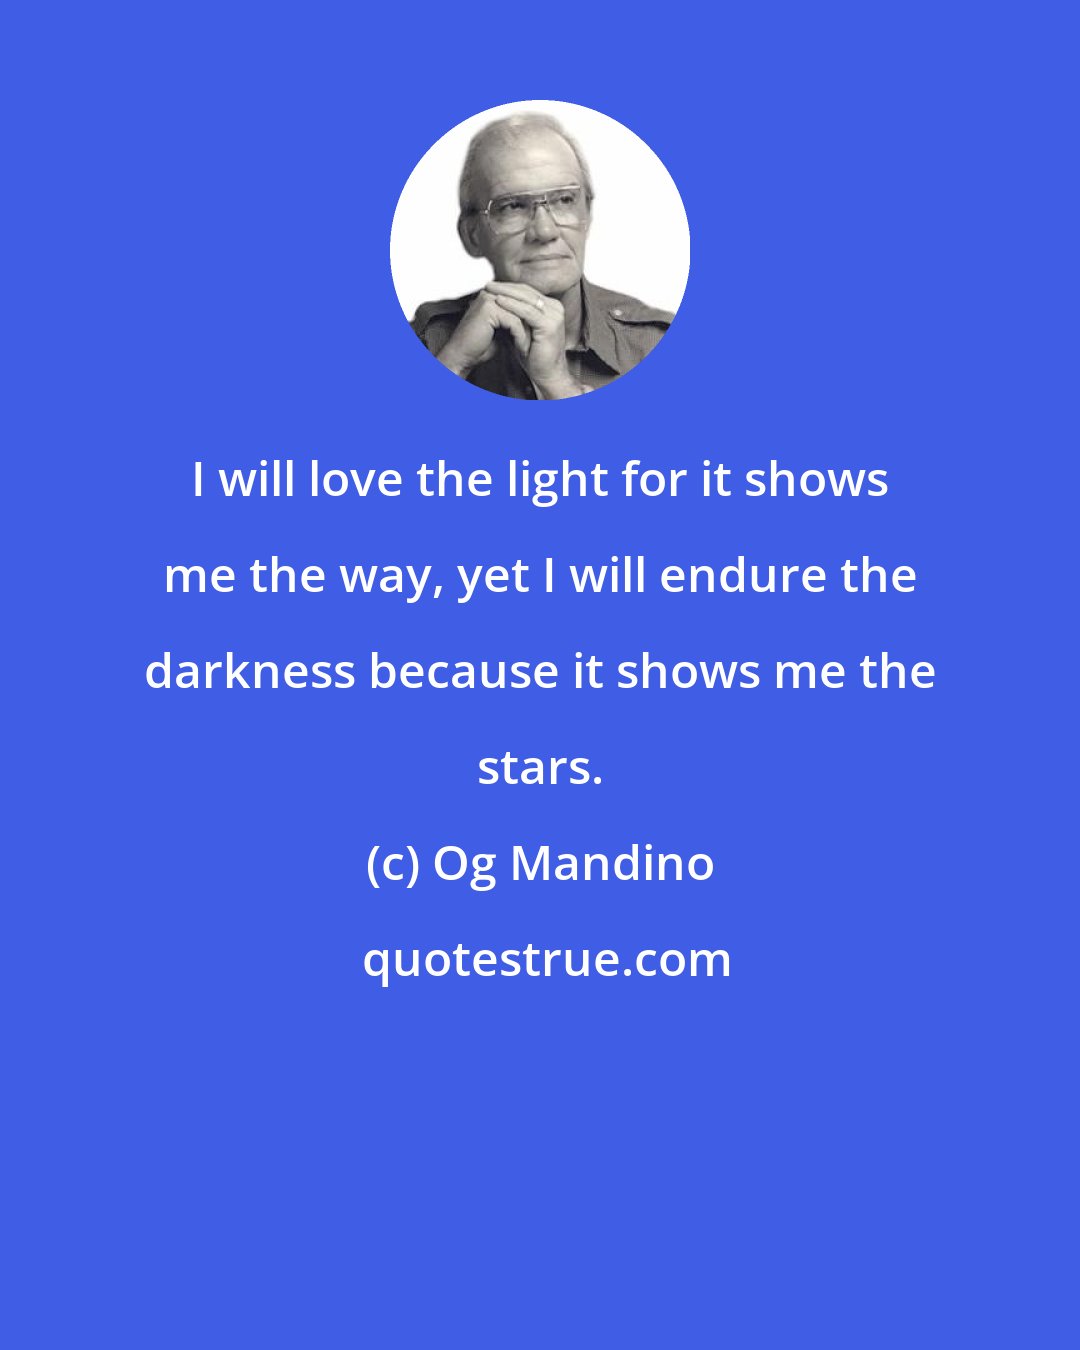 Og Mandino: I will love the light for it shows me the way, yet I will endure the darkness because it shows me the stars.